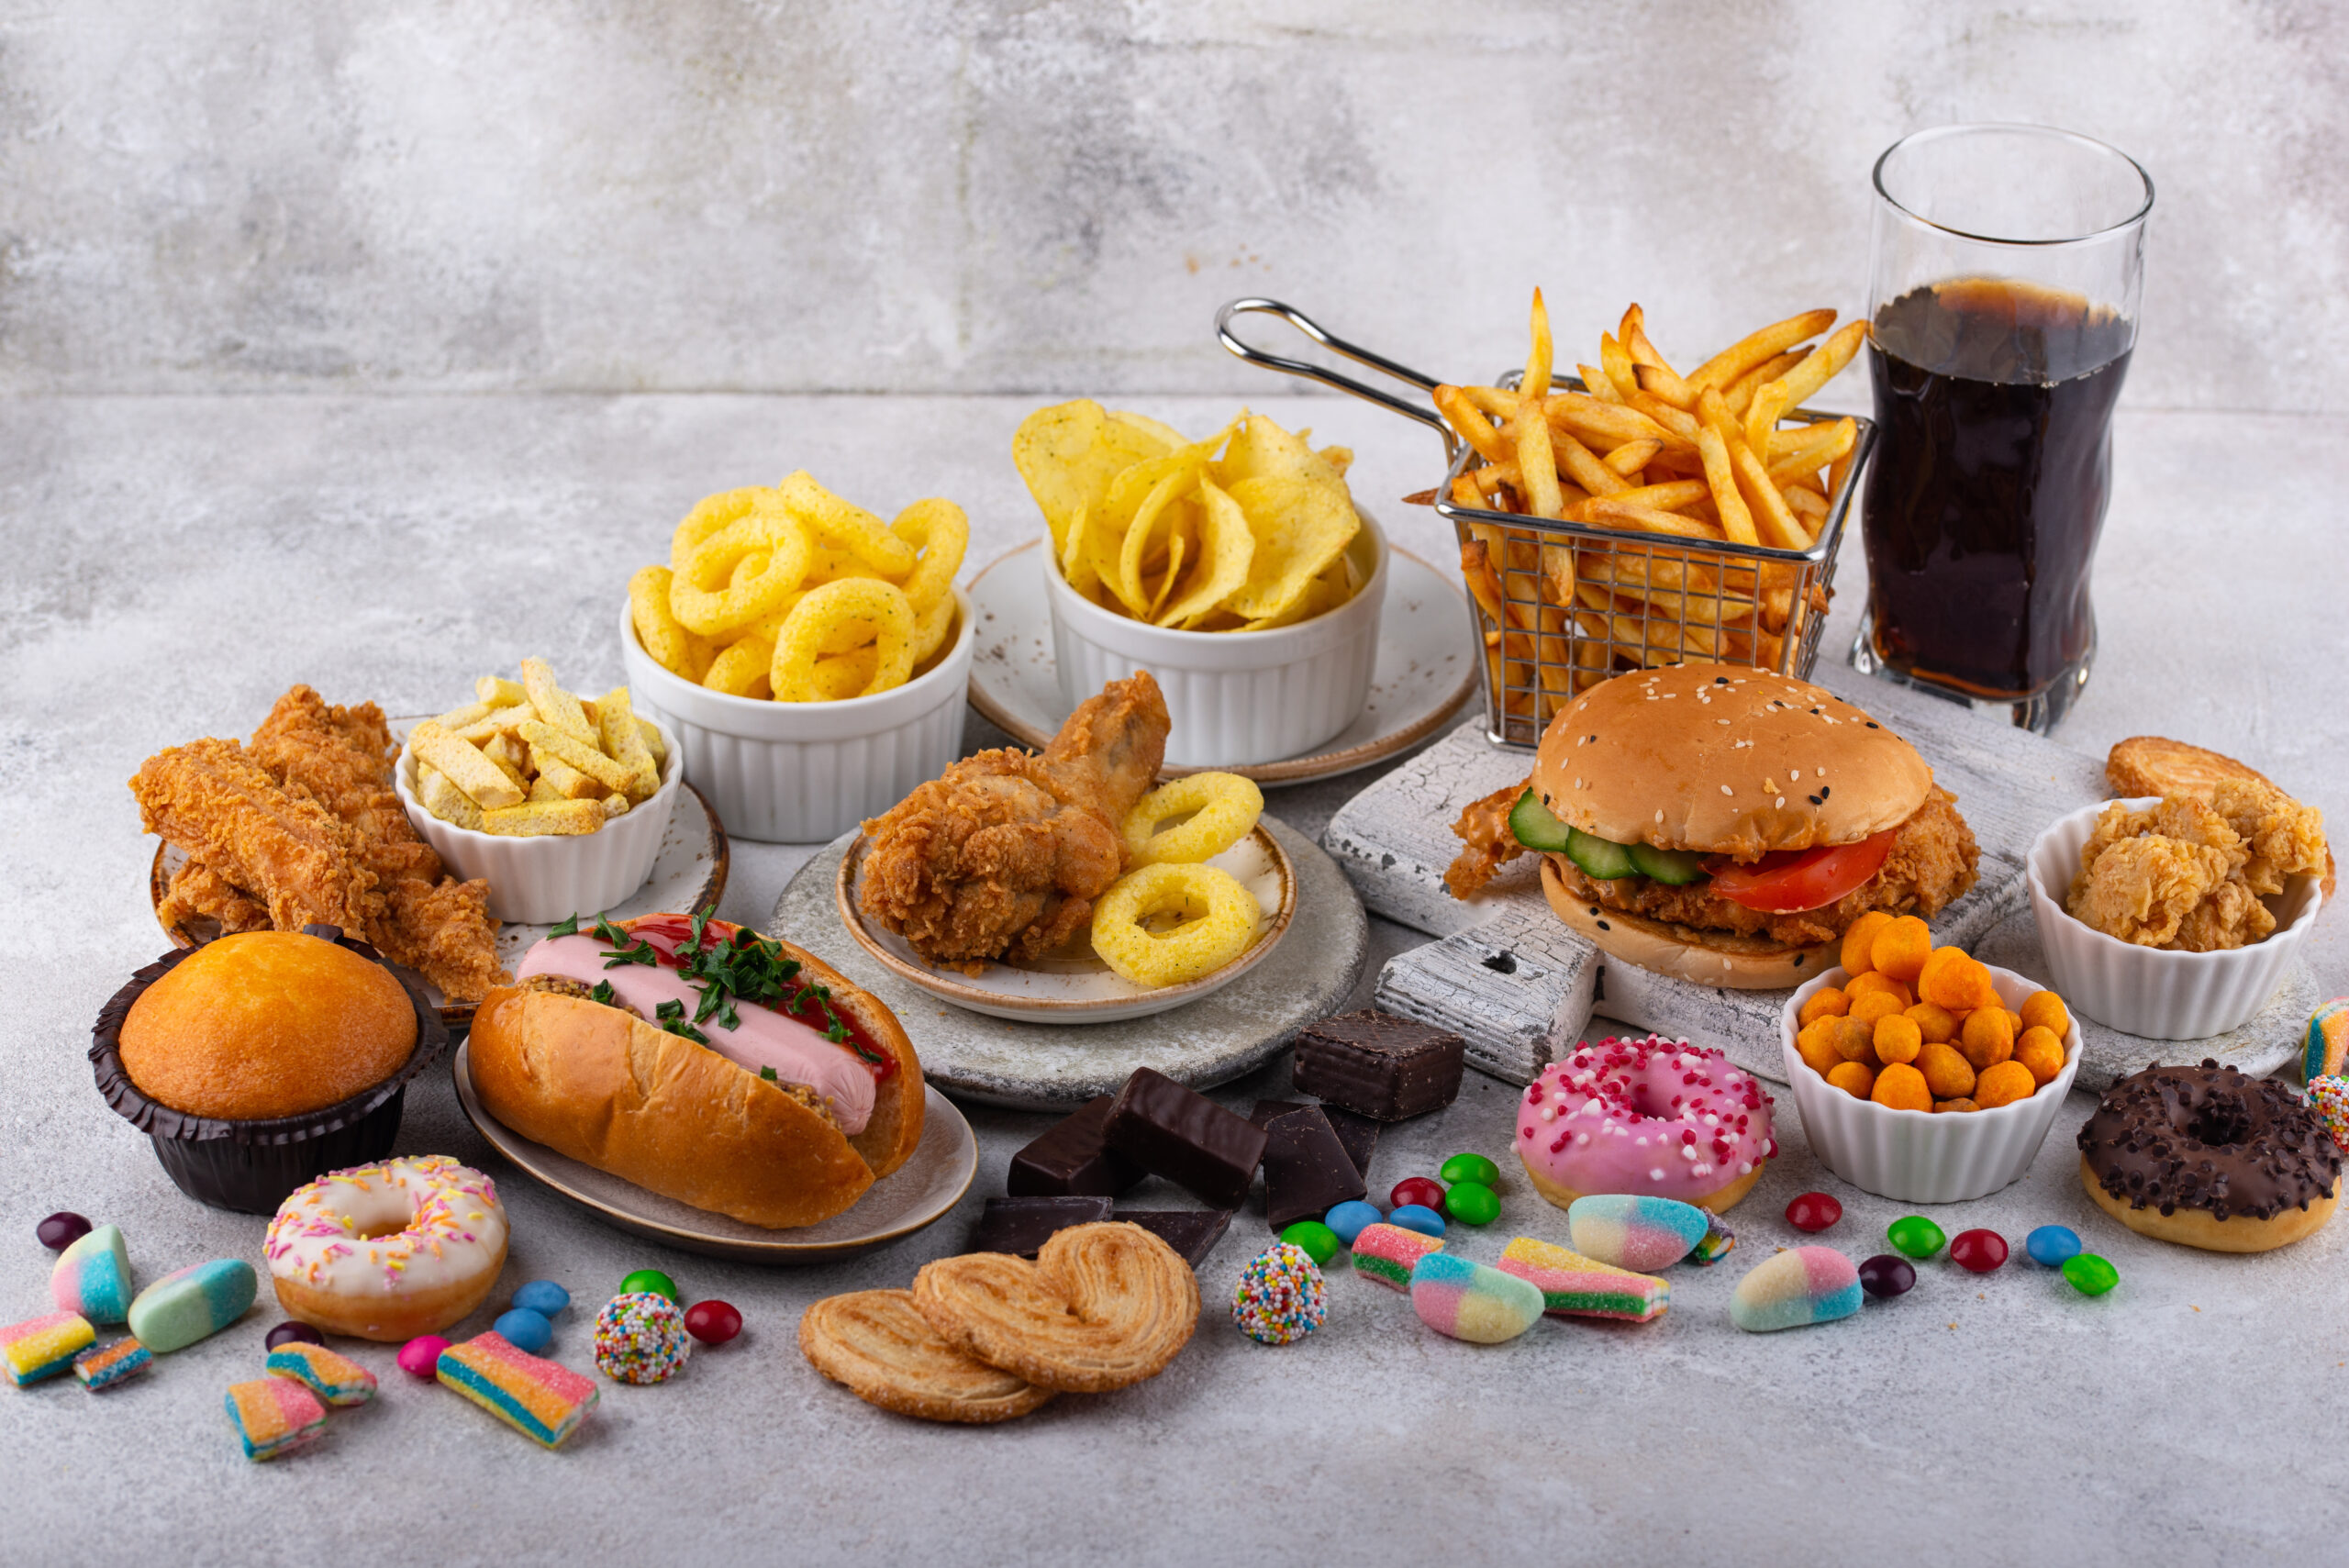 Assortment of unhealthy junk food. Burger, french fries, hot dog, snack and sweets